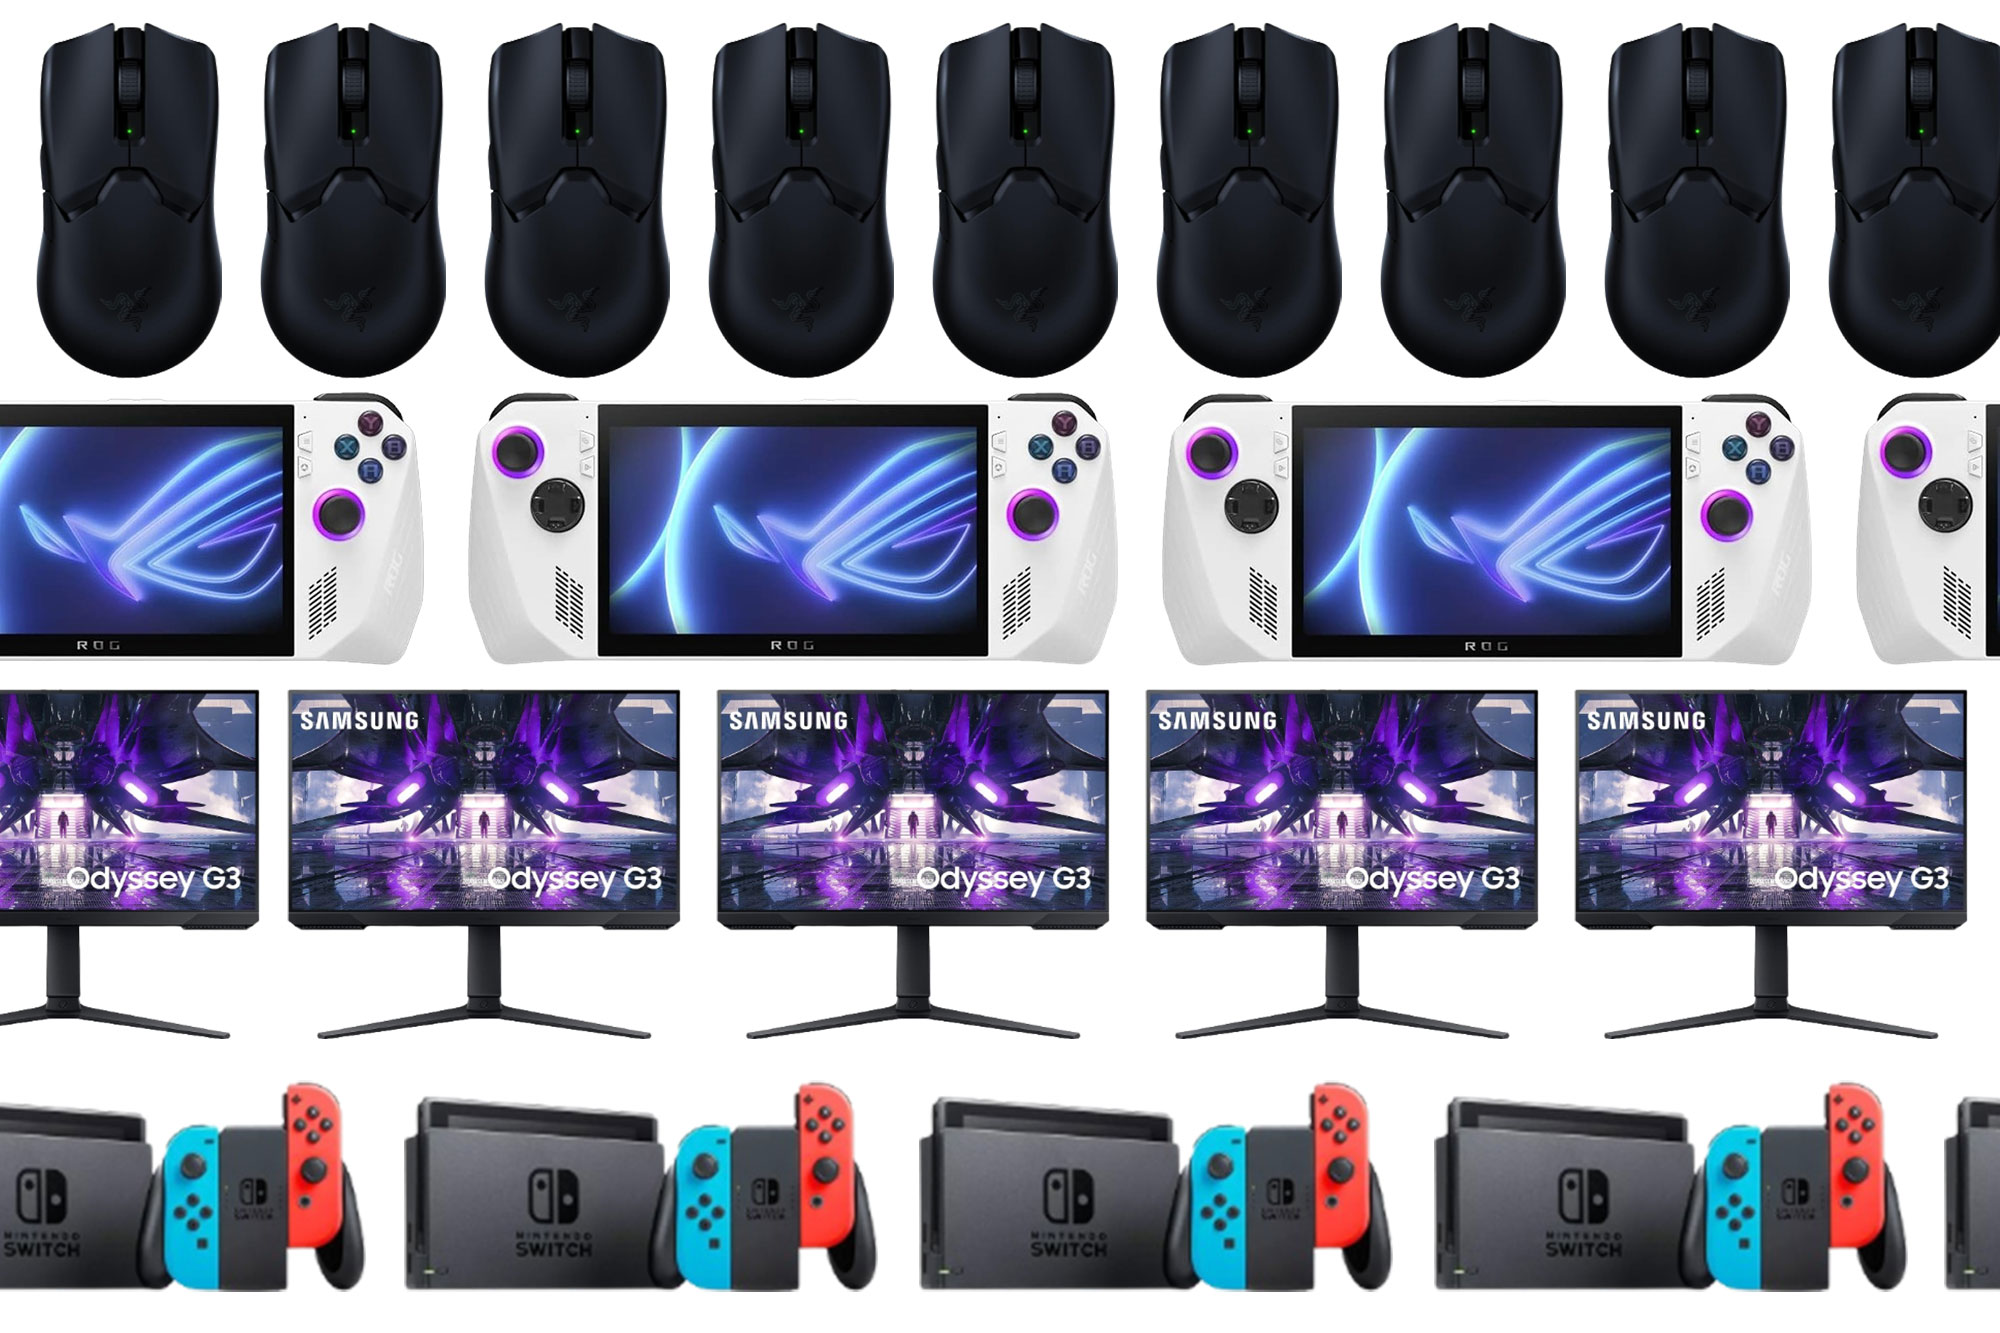 48 Best Gifts for Gamers 2023 - Popular Gaming Gifts for Guys